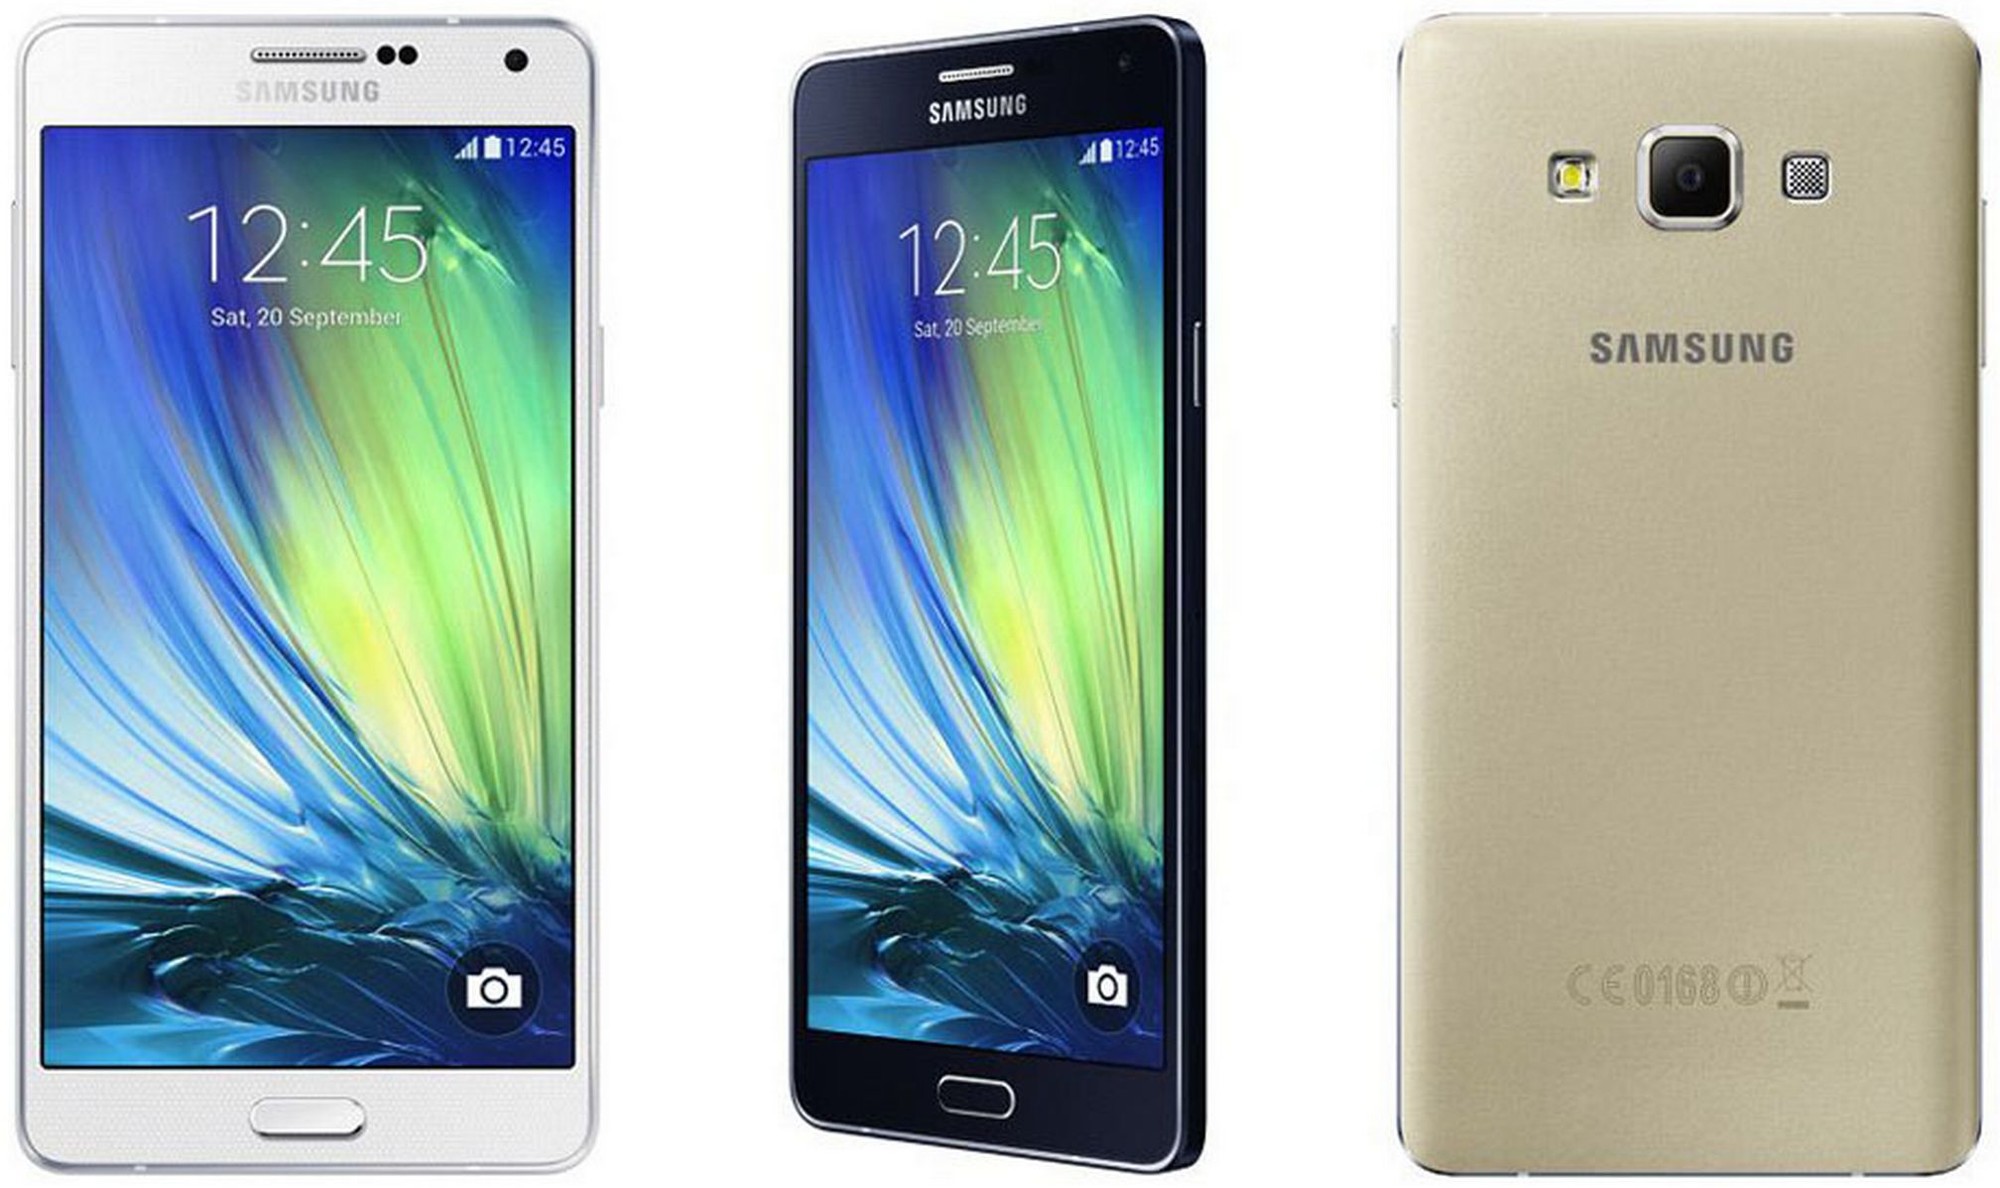 Samsung Galaxy A7 SM-A700F - Specs and Price - Phonegg